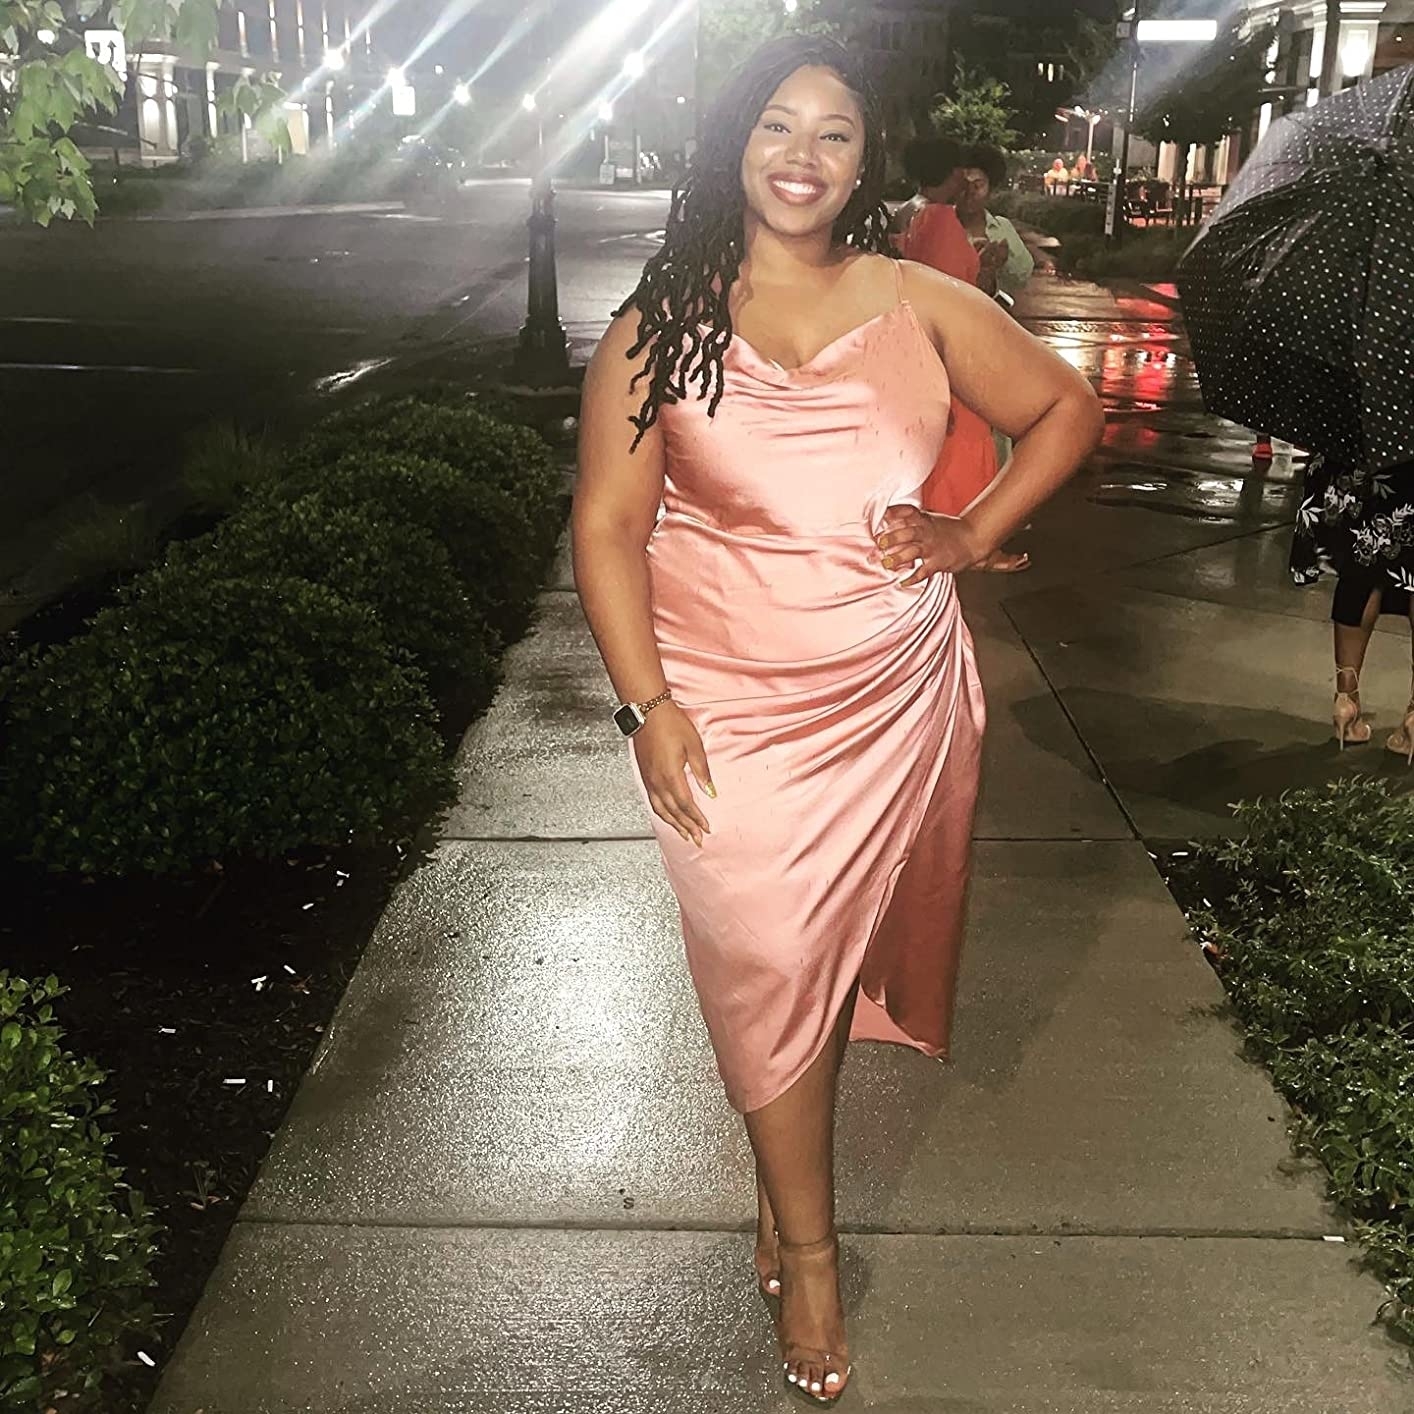 Reviewer wearing the peach colored dress